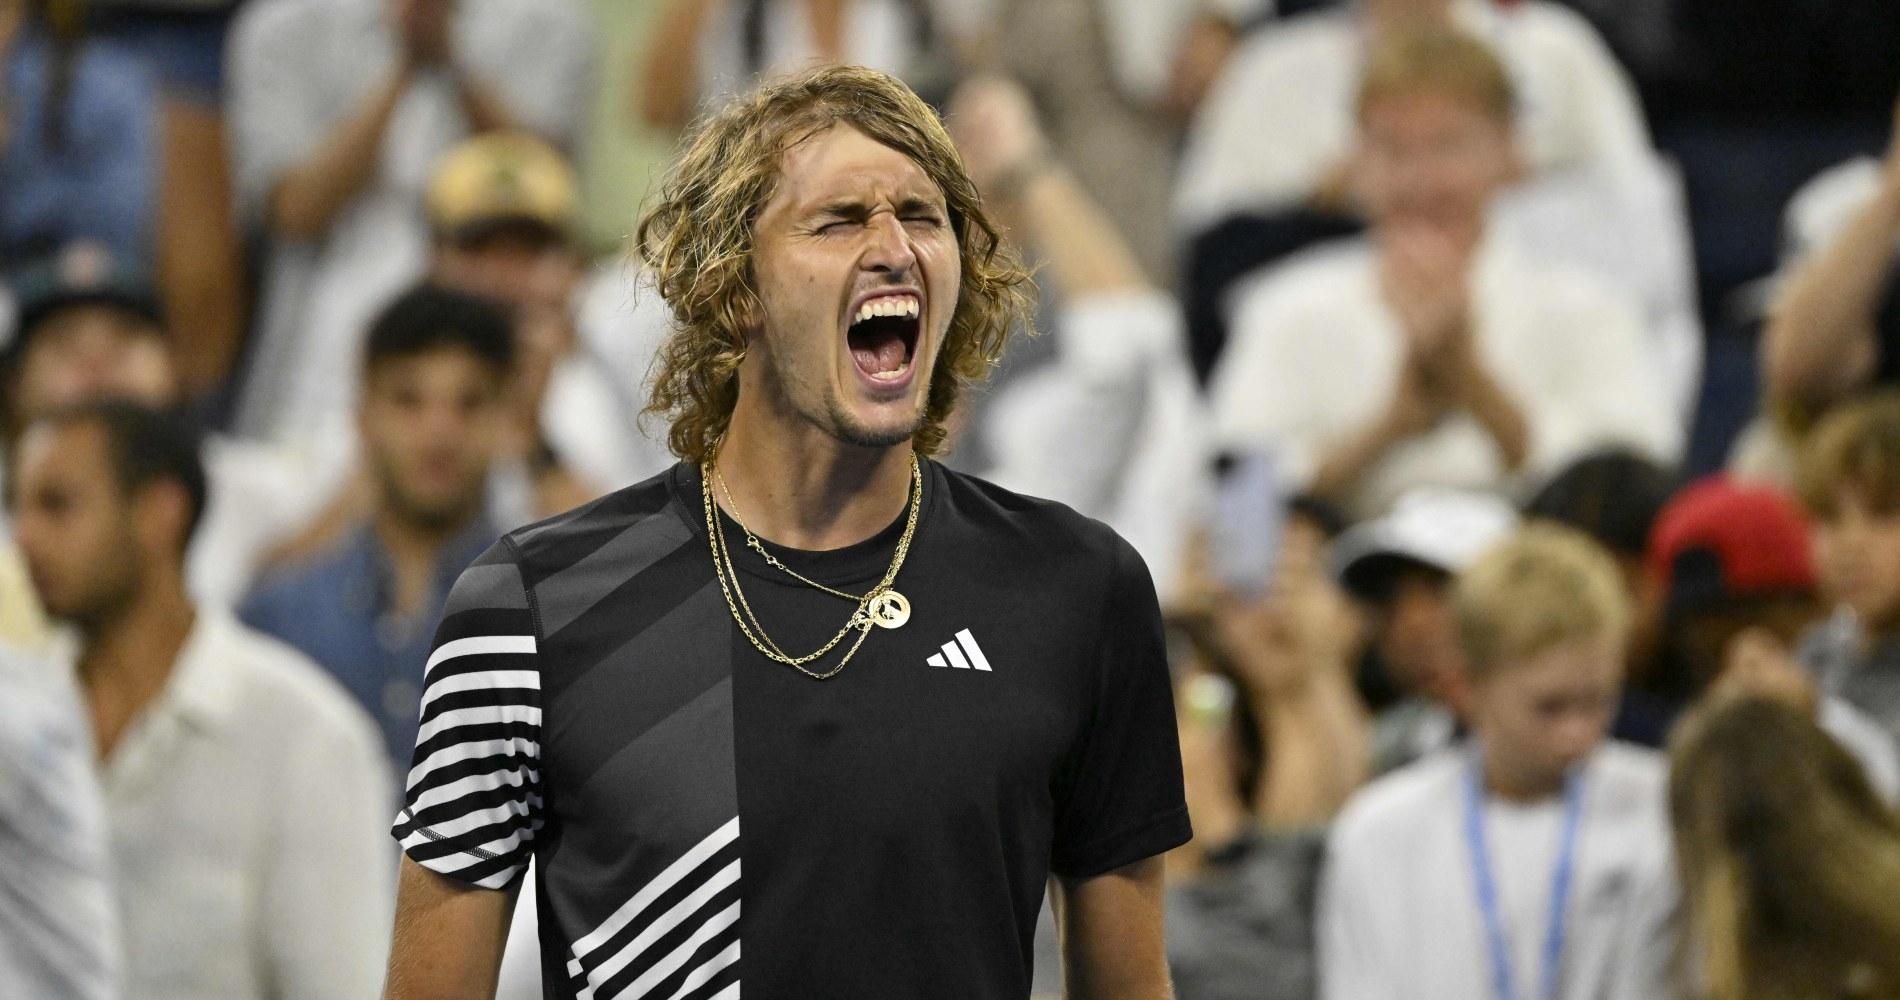 “This is what I live for” Zverev into US Open quarter-finals, beats Sinner in gruelling late-night epic